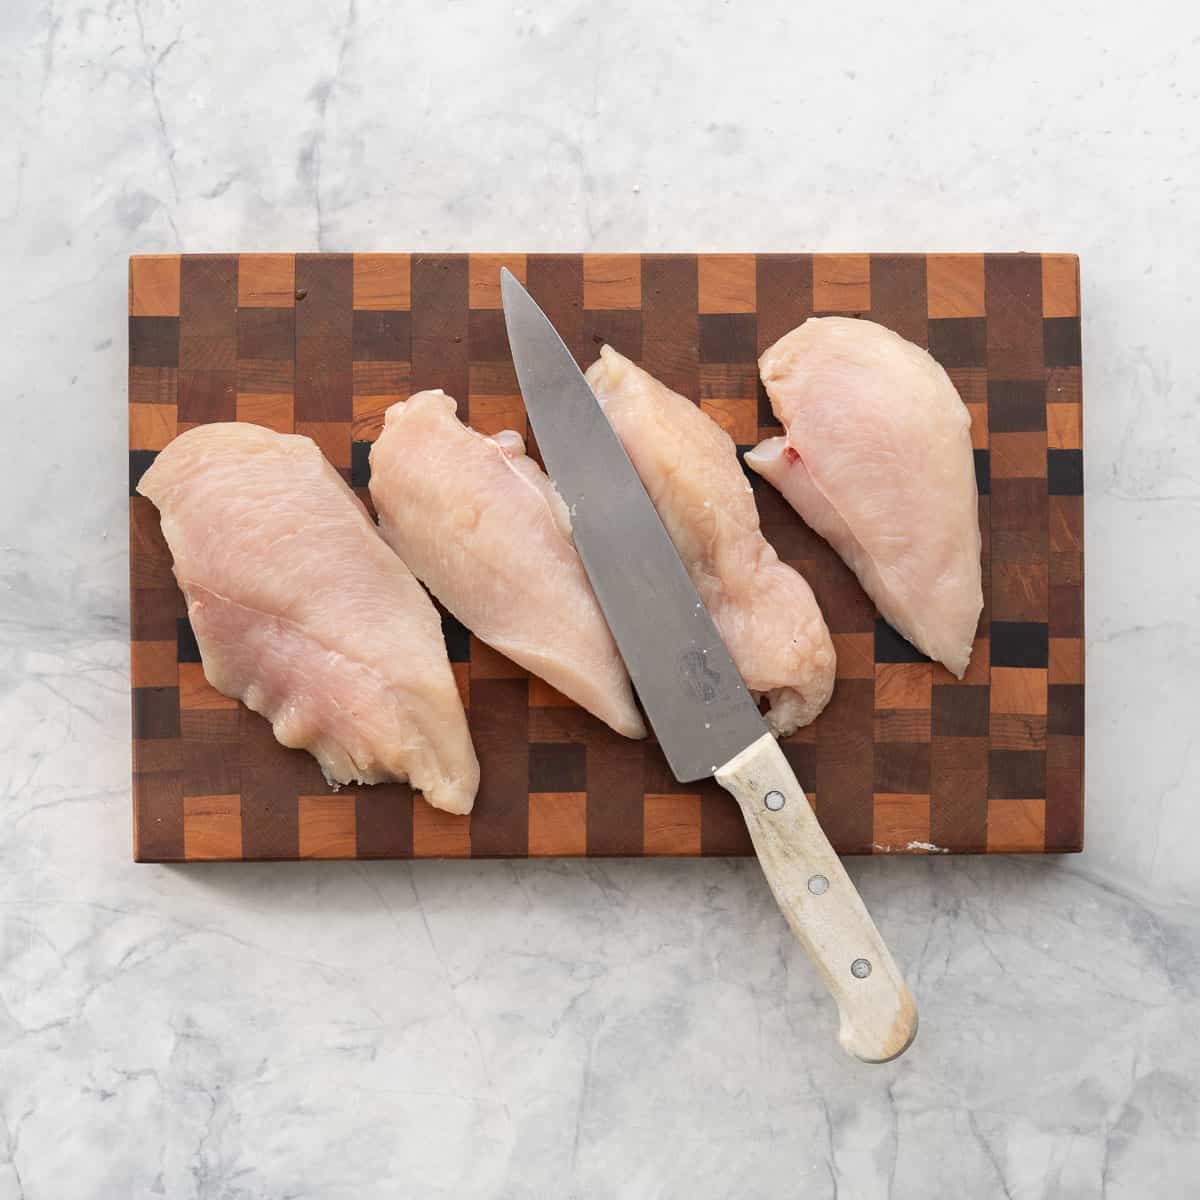 Four chicken cutlets (halved chicken breasts) on a wooden chopping board next to a wooden handled chefs knife. 